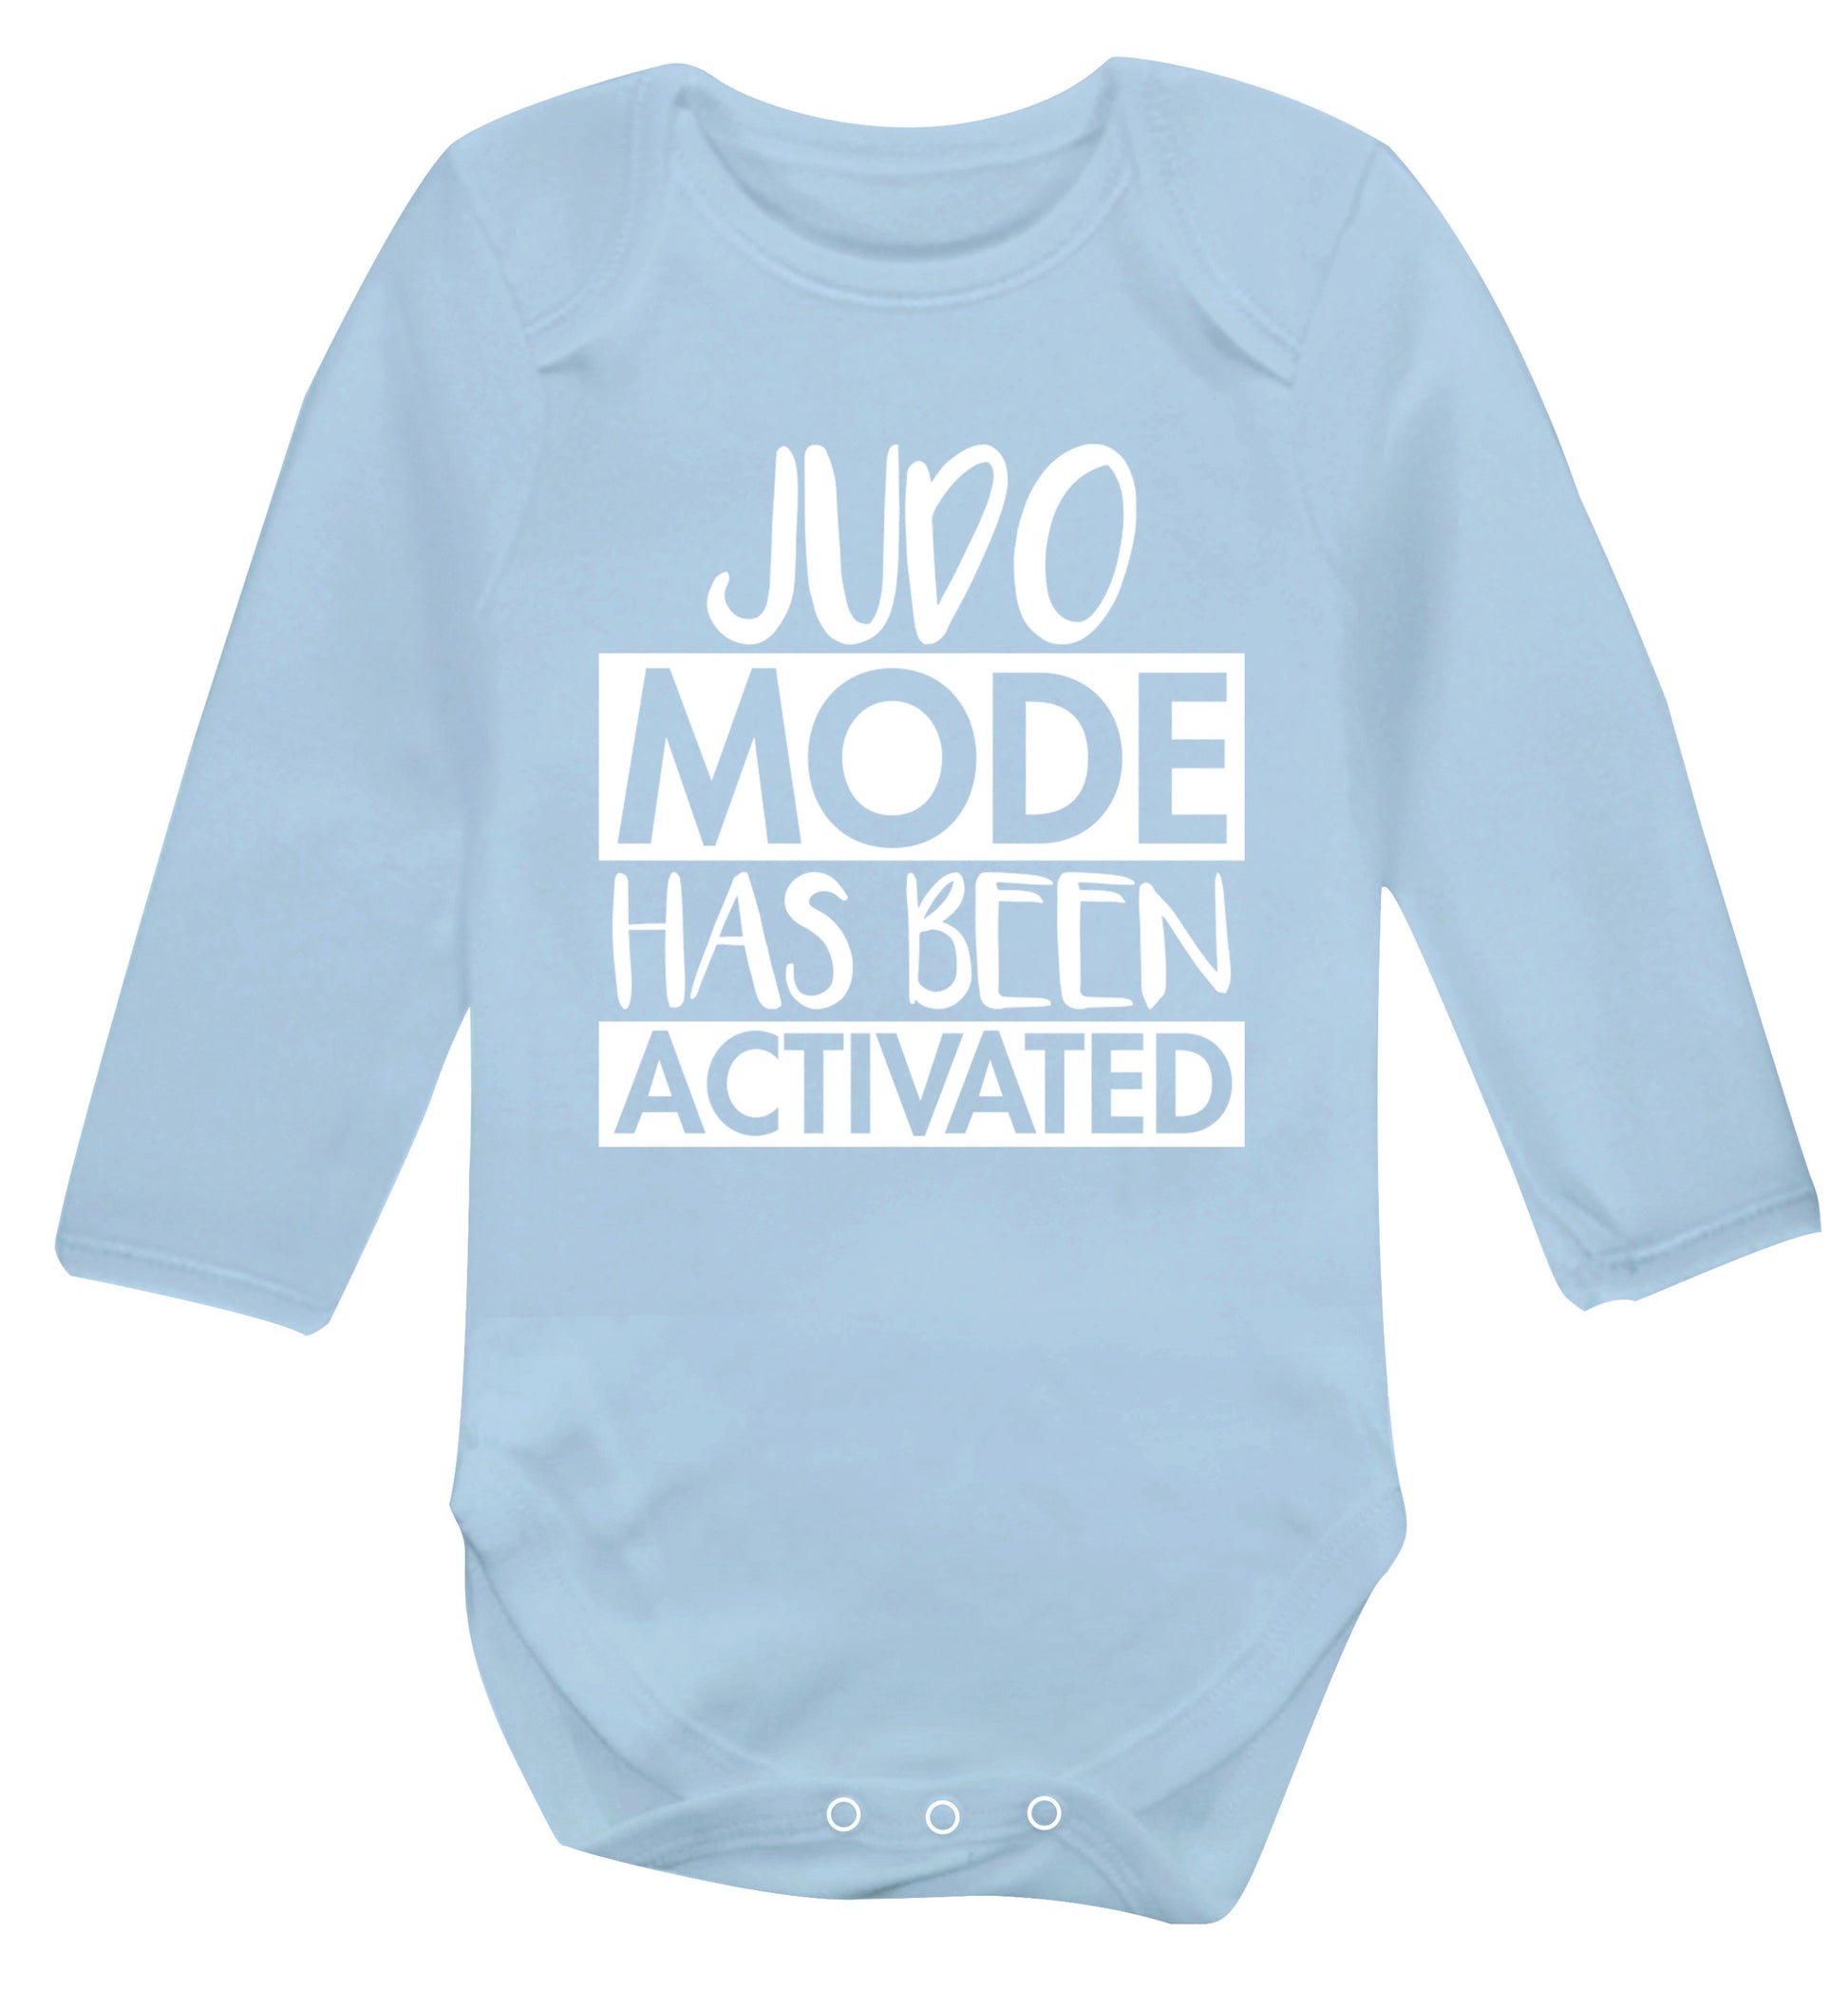 Judo mode activated Baby Vest long sleeved pale blue 6-12 months